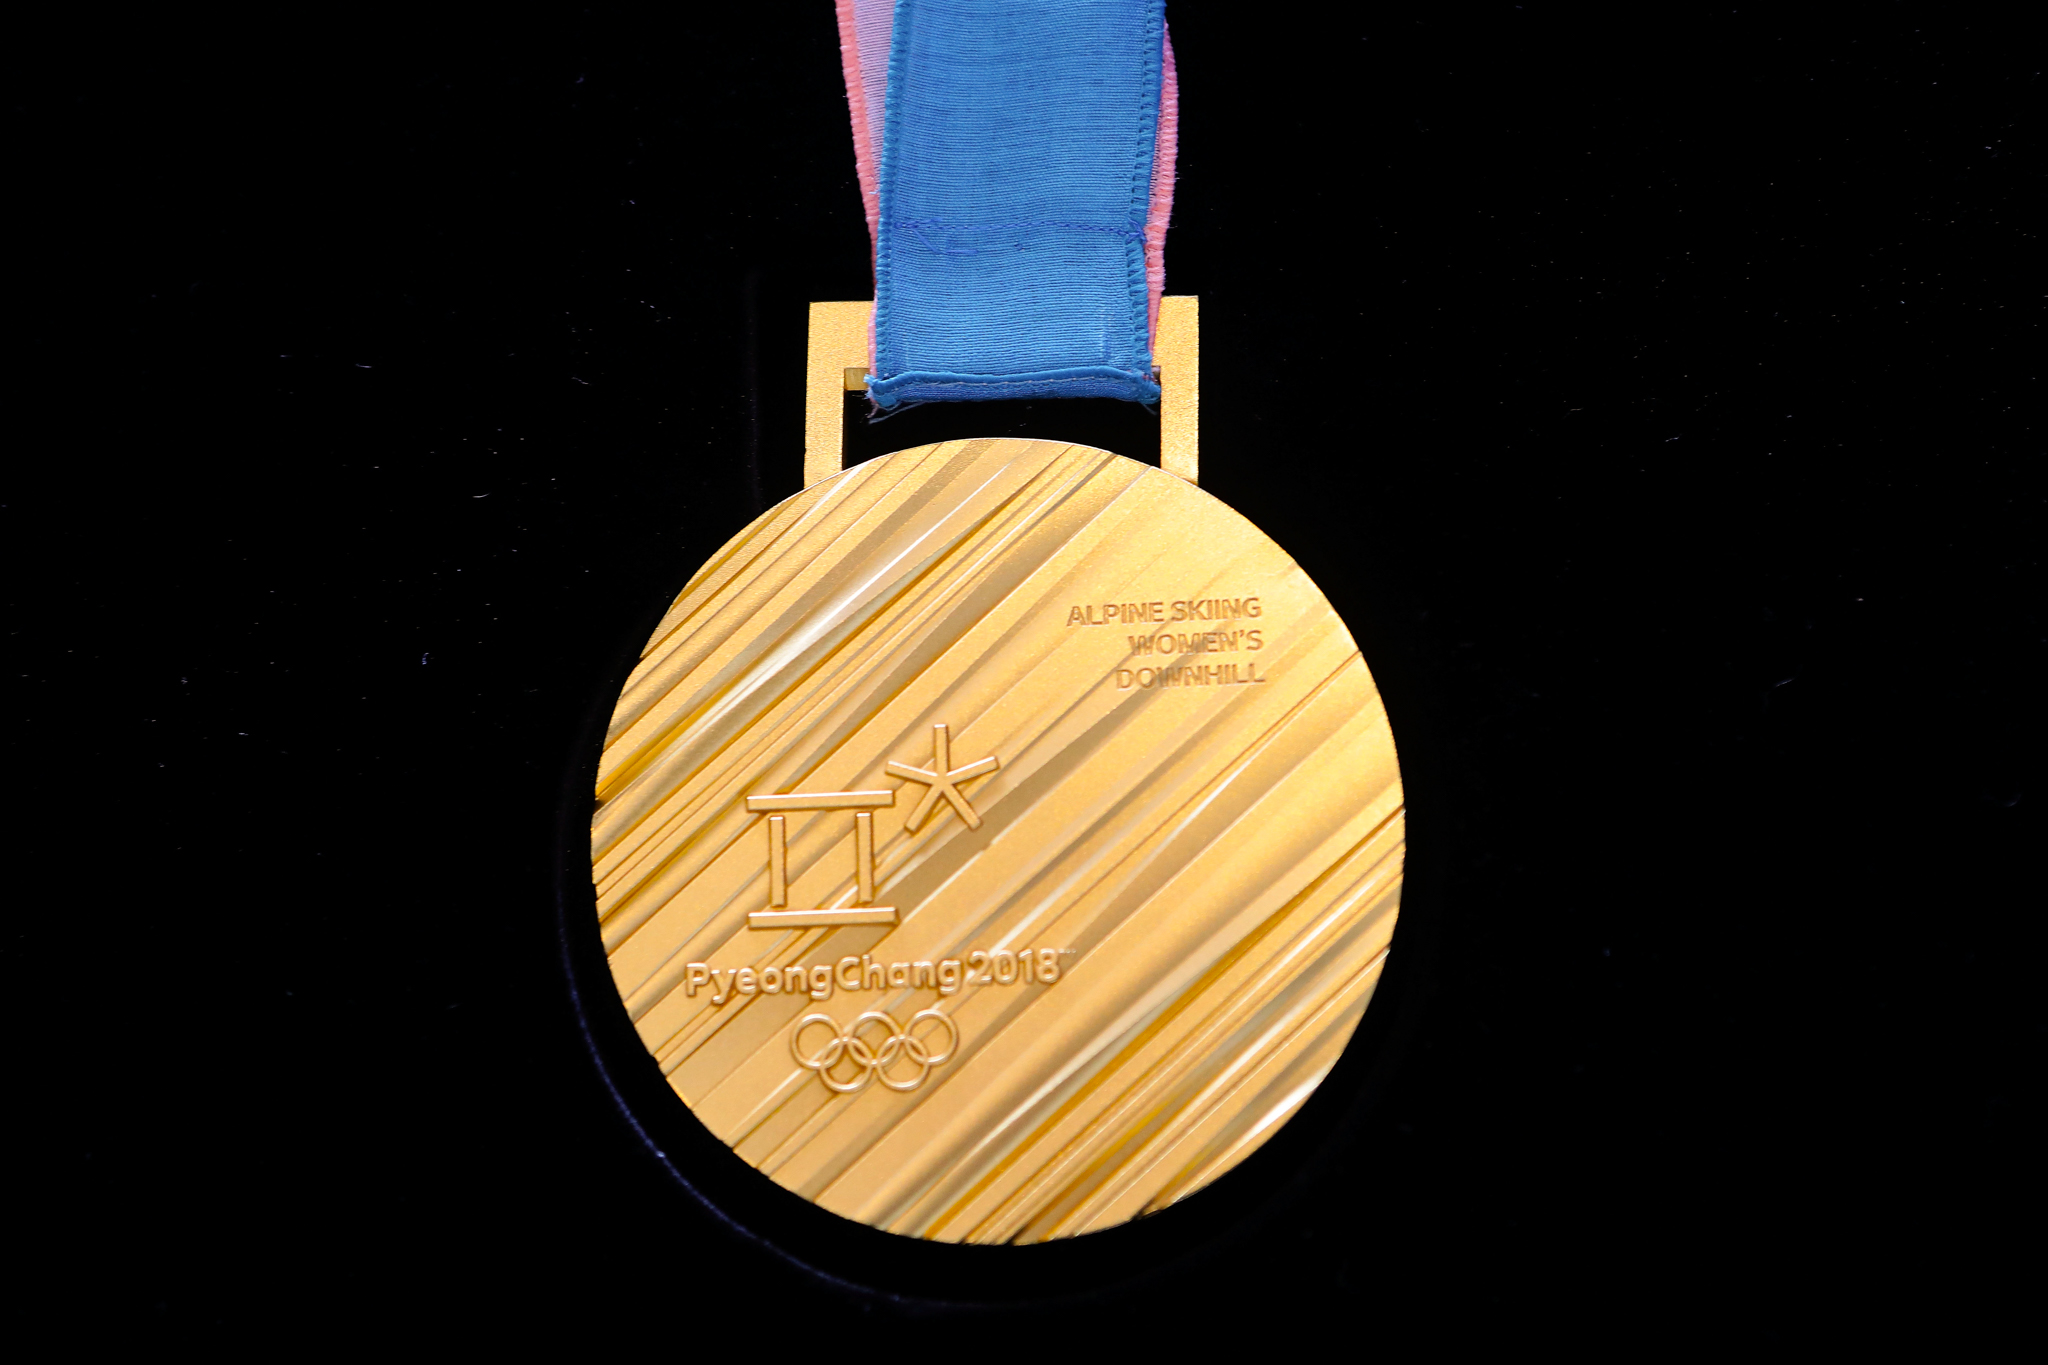 What's behind those shiny Olympic medals? | ShareAmerica